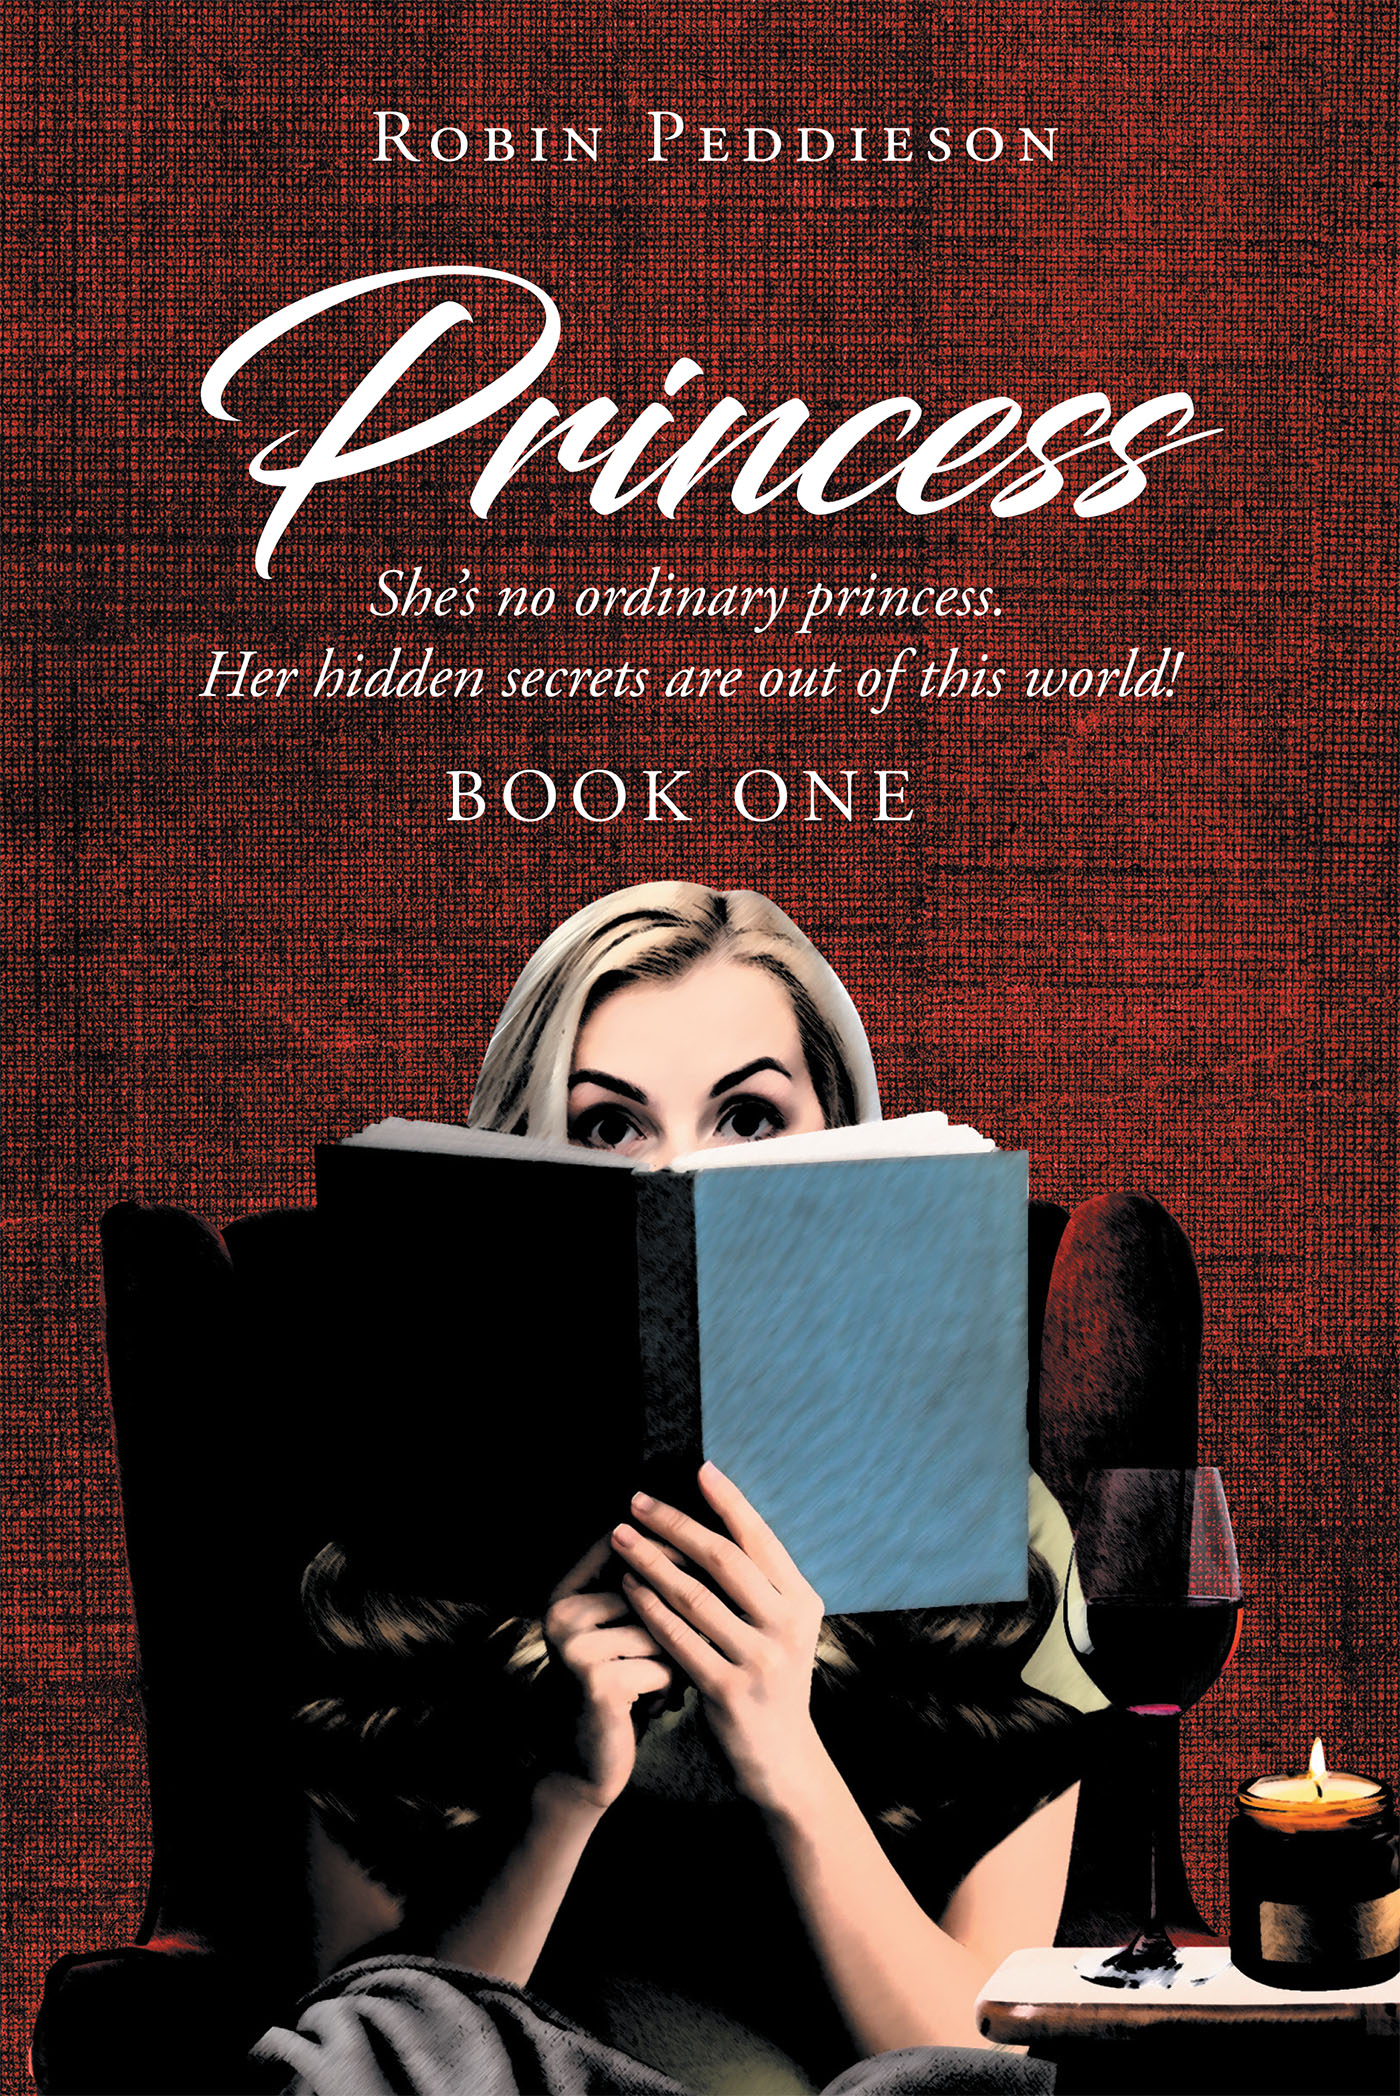 Robin Peddieson’s New Book, "Princess," Follows a Clinical Psychologist Who Begins to Question Her Reality After Several Unsettling Happenings and Mysterious Ailments